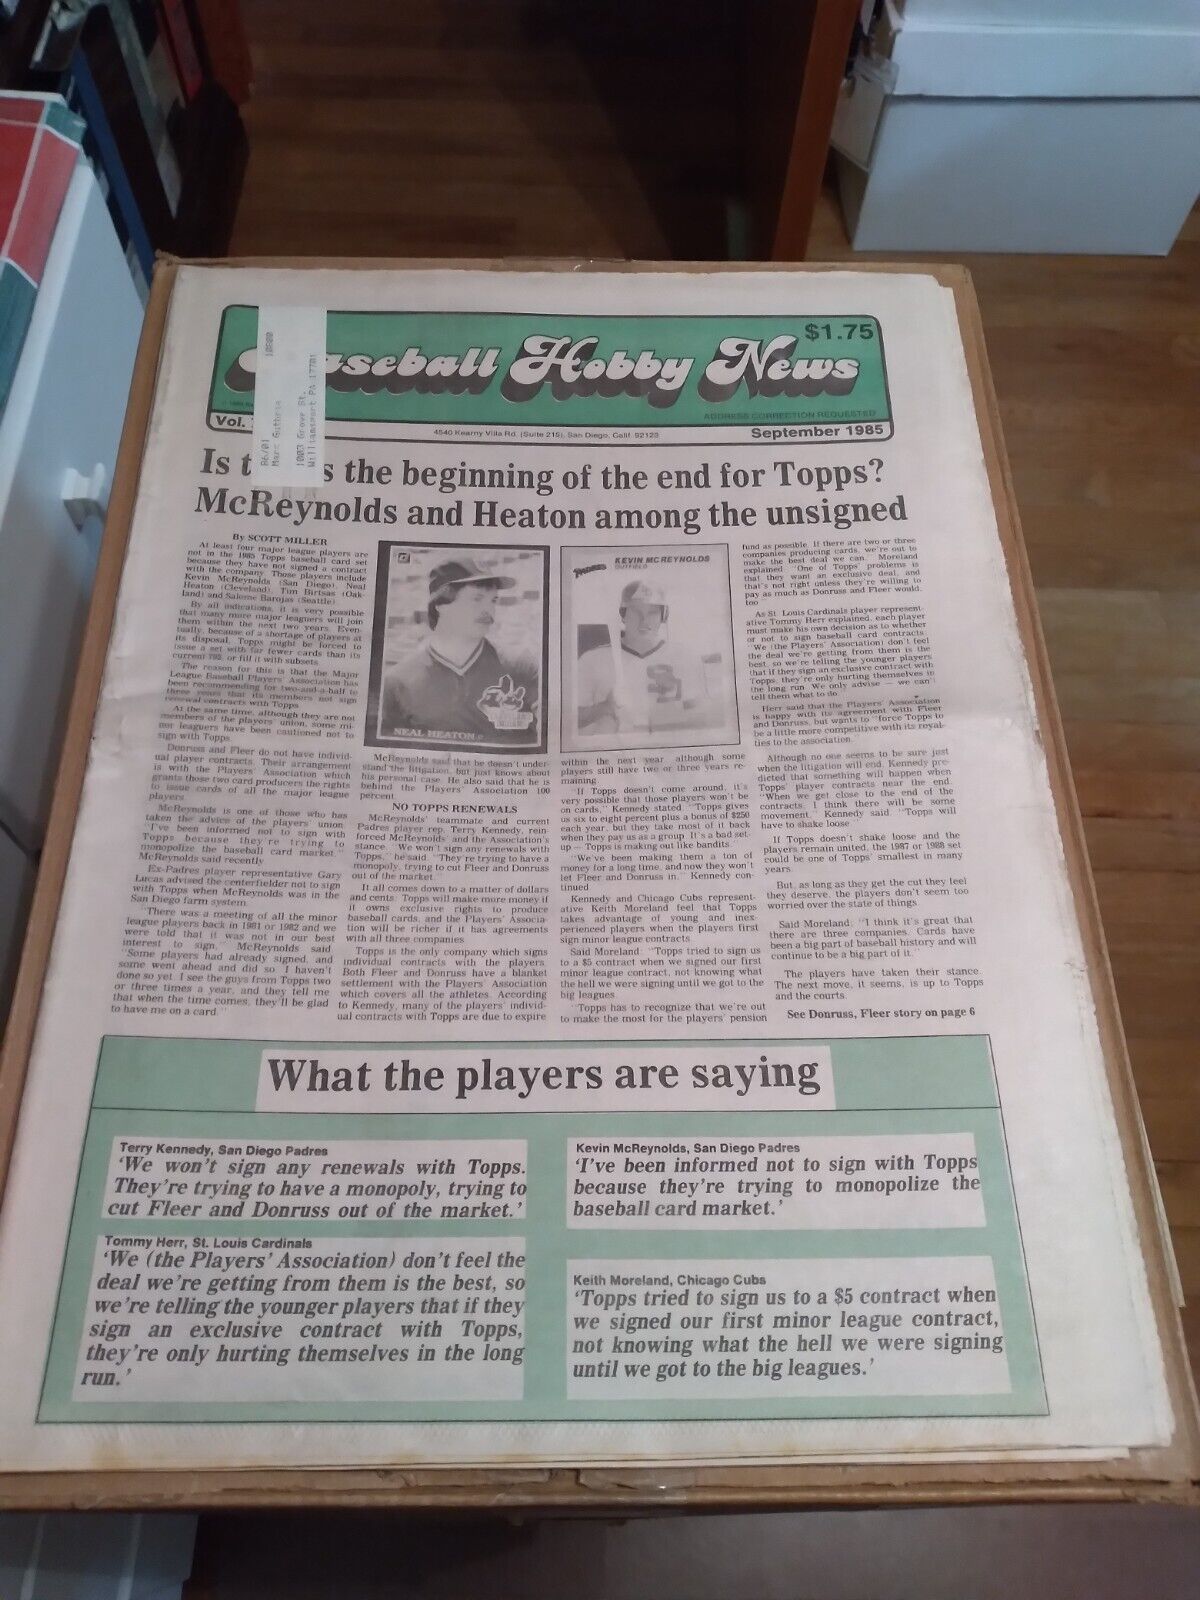 September 1985 Baseball Hobby News Mlb Players Not Signing Topps Contracts